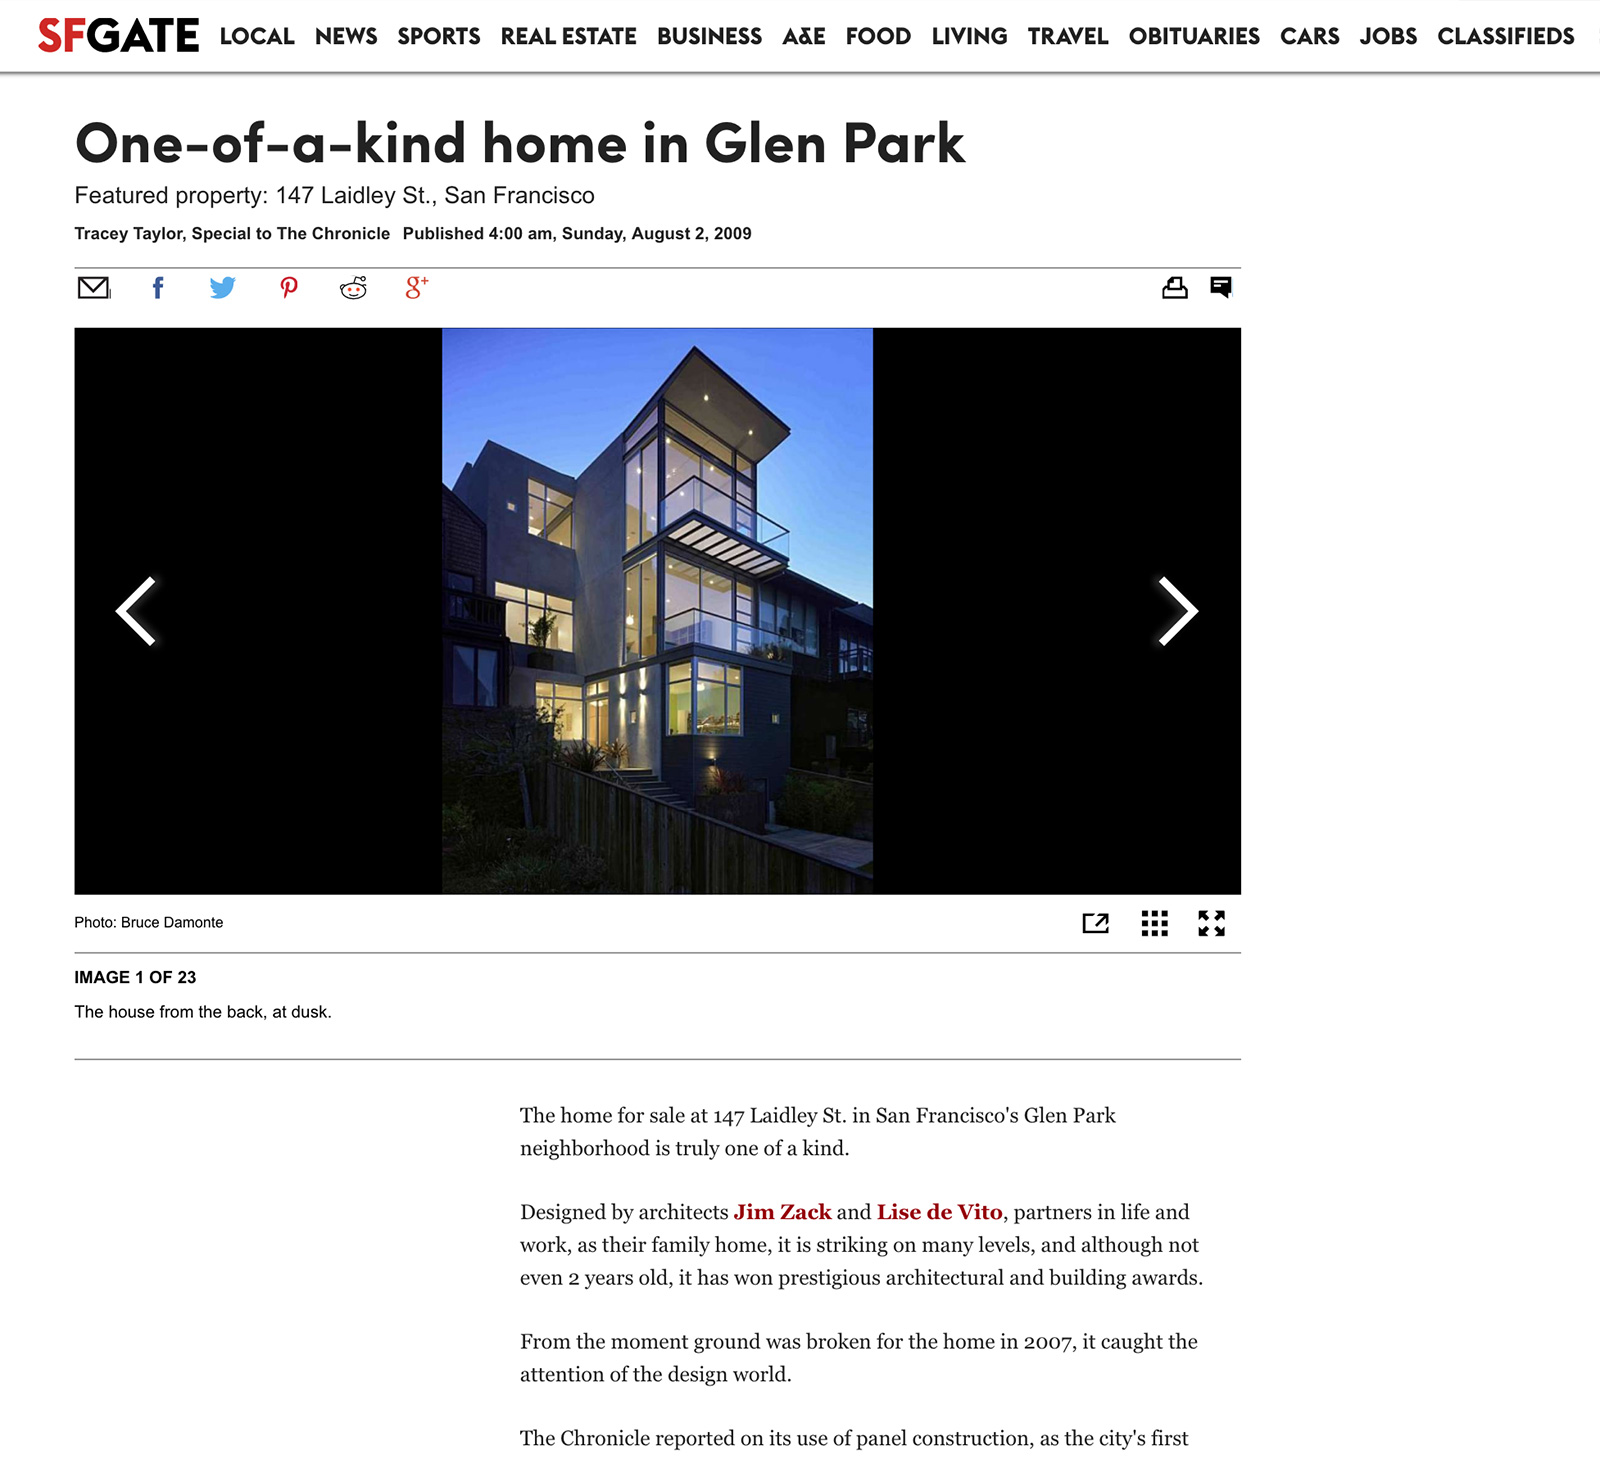 One-of-a-kind home in Glen Park